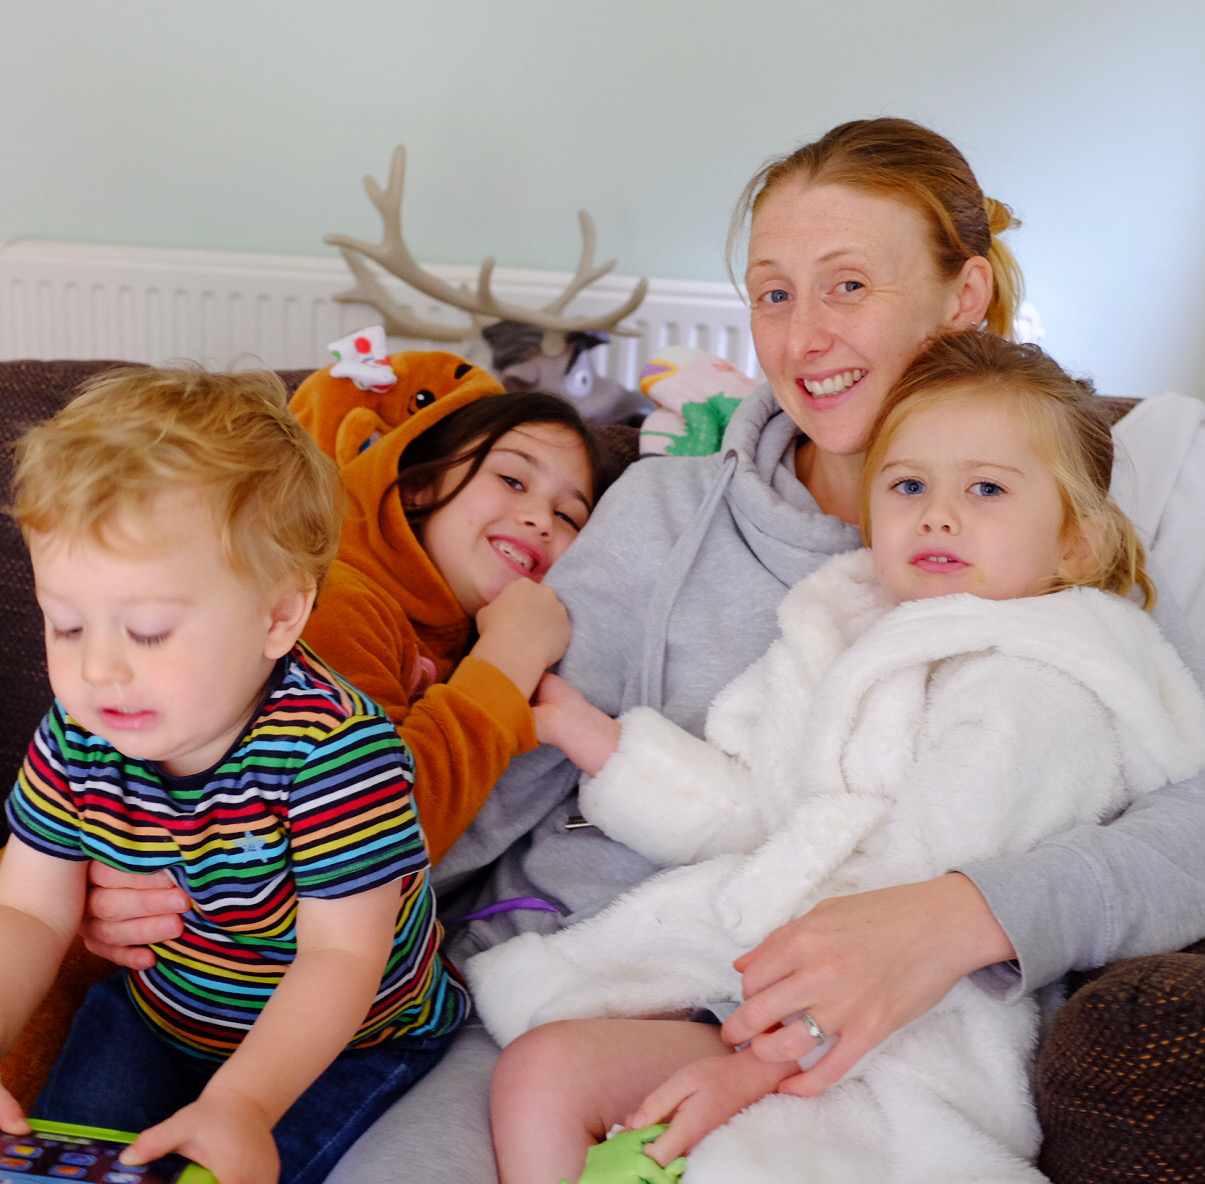 10 ways to look after your family